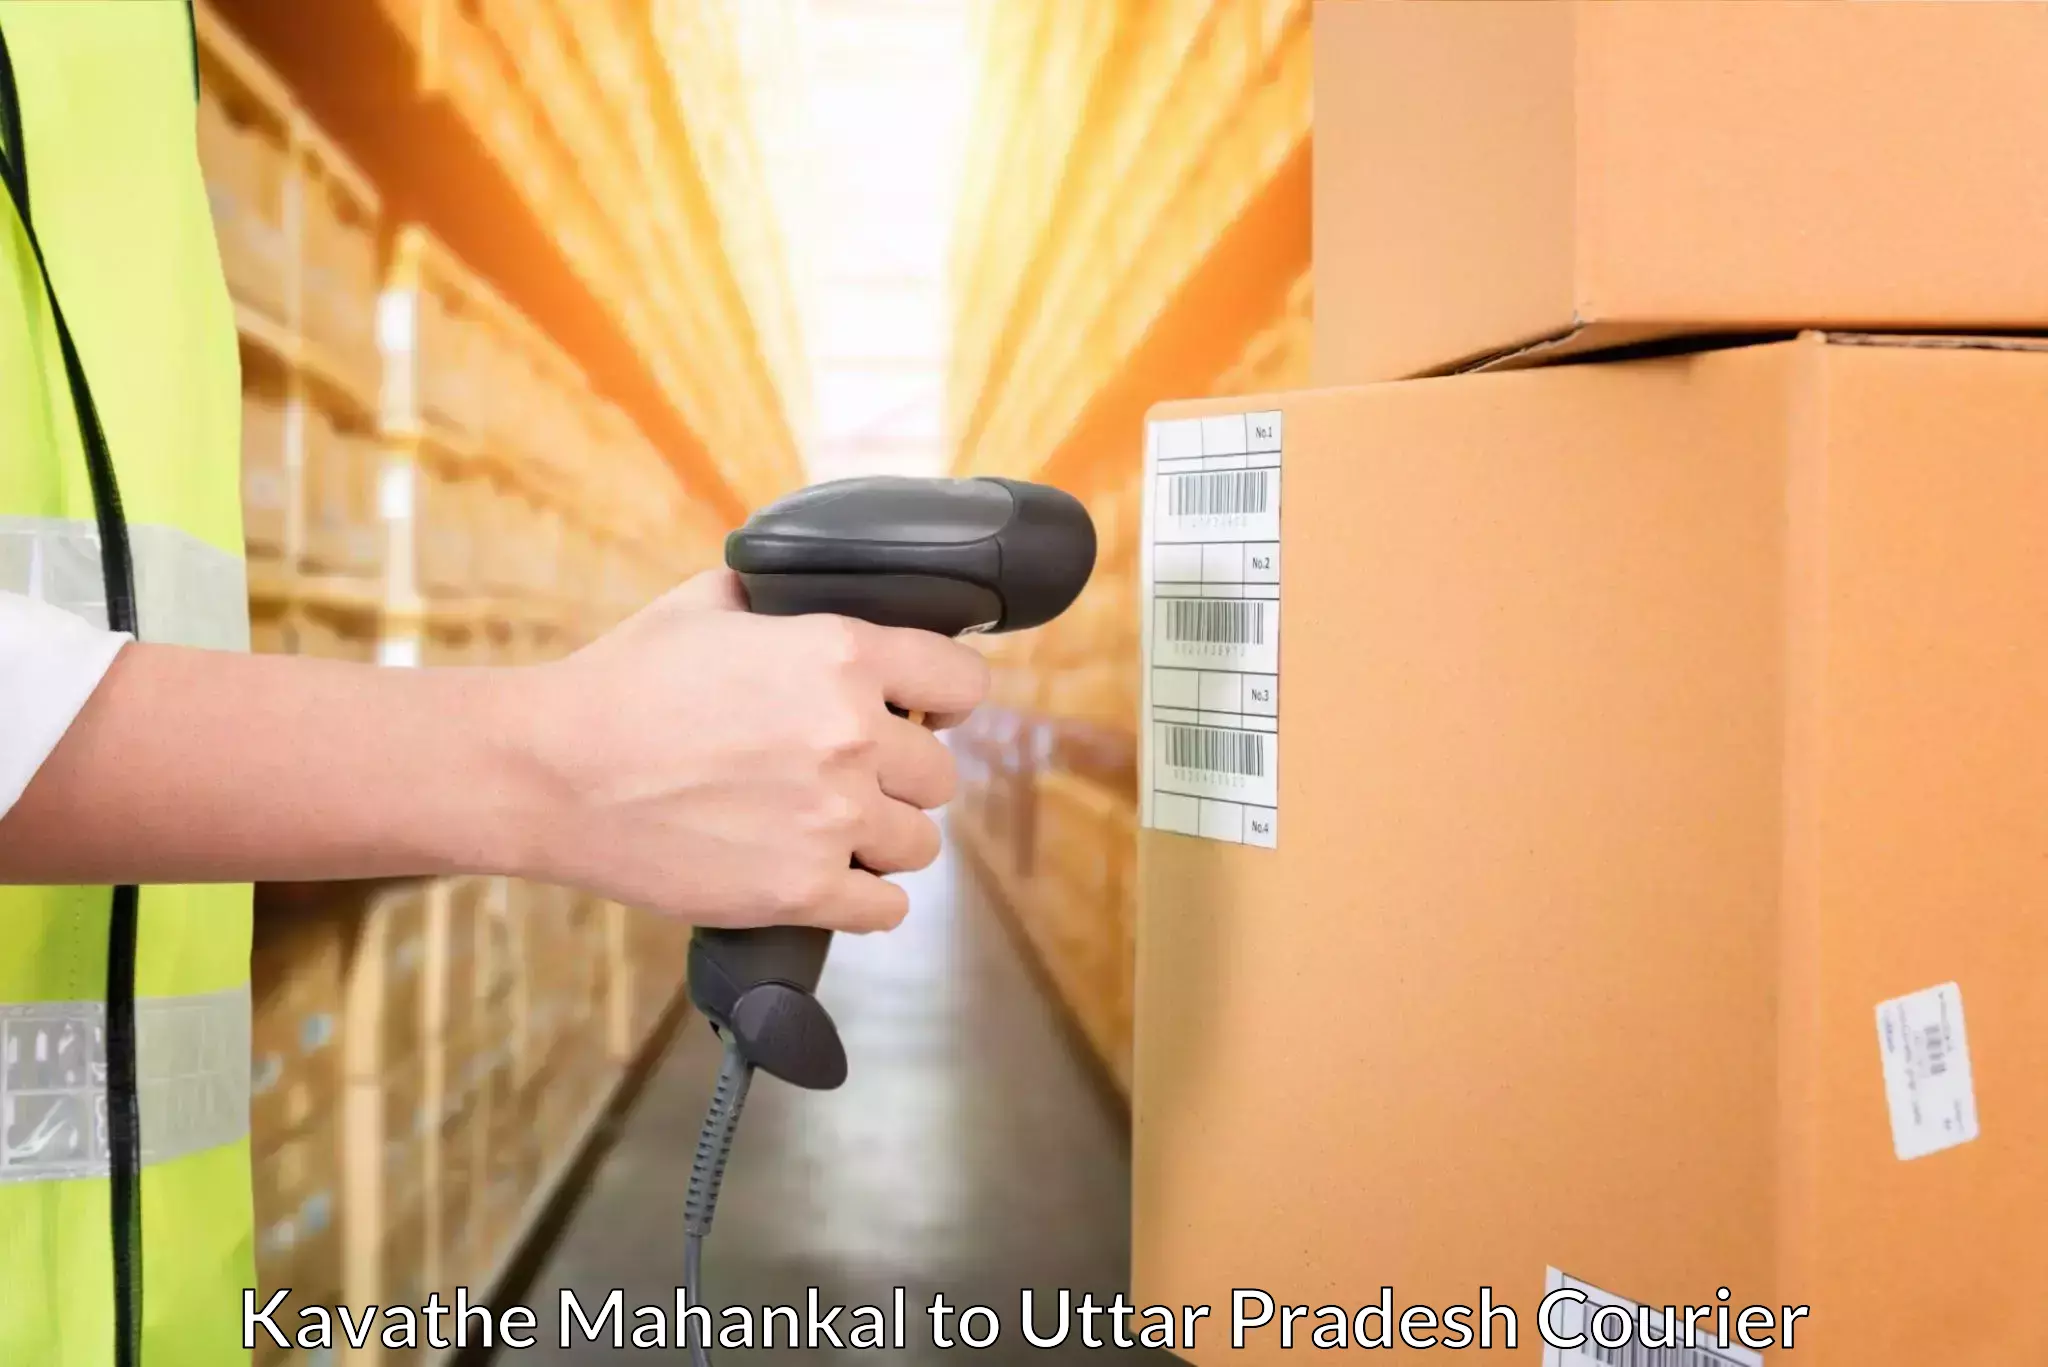 Package tracking Kavathe Mahankal to Aligarh